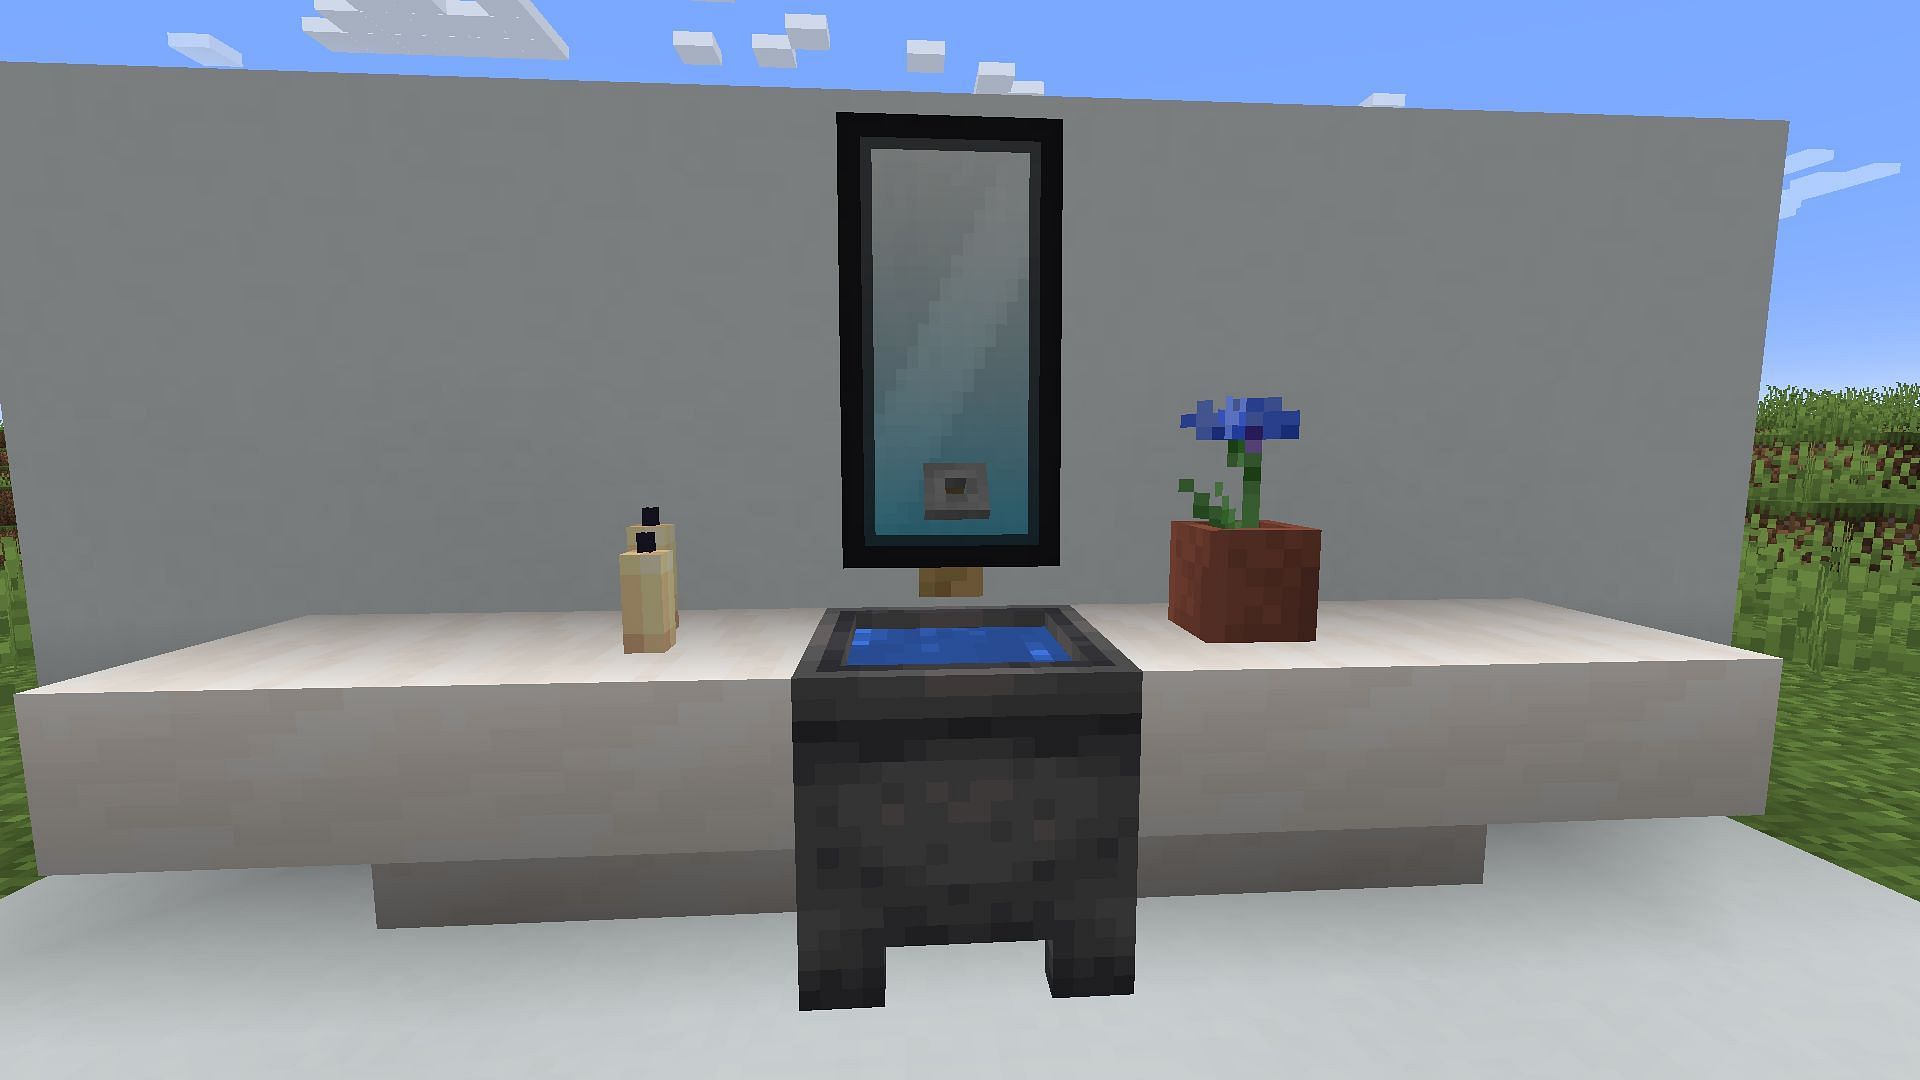 An example of a banner customized to look like a mirror (Image via Minecraft)